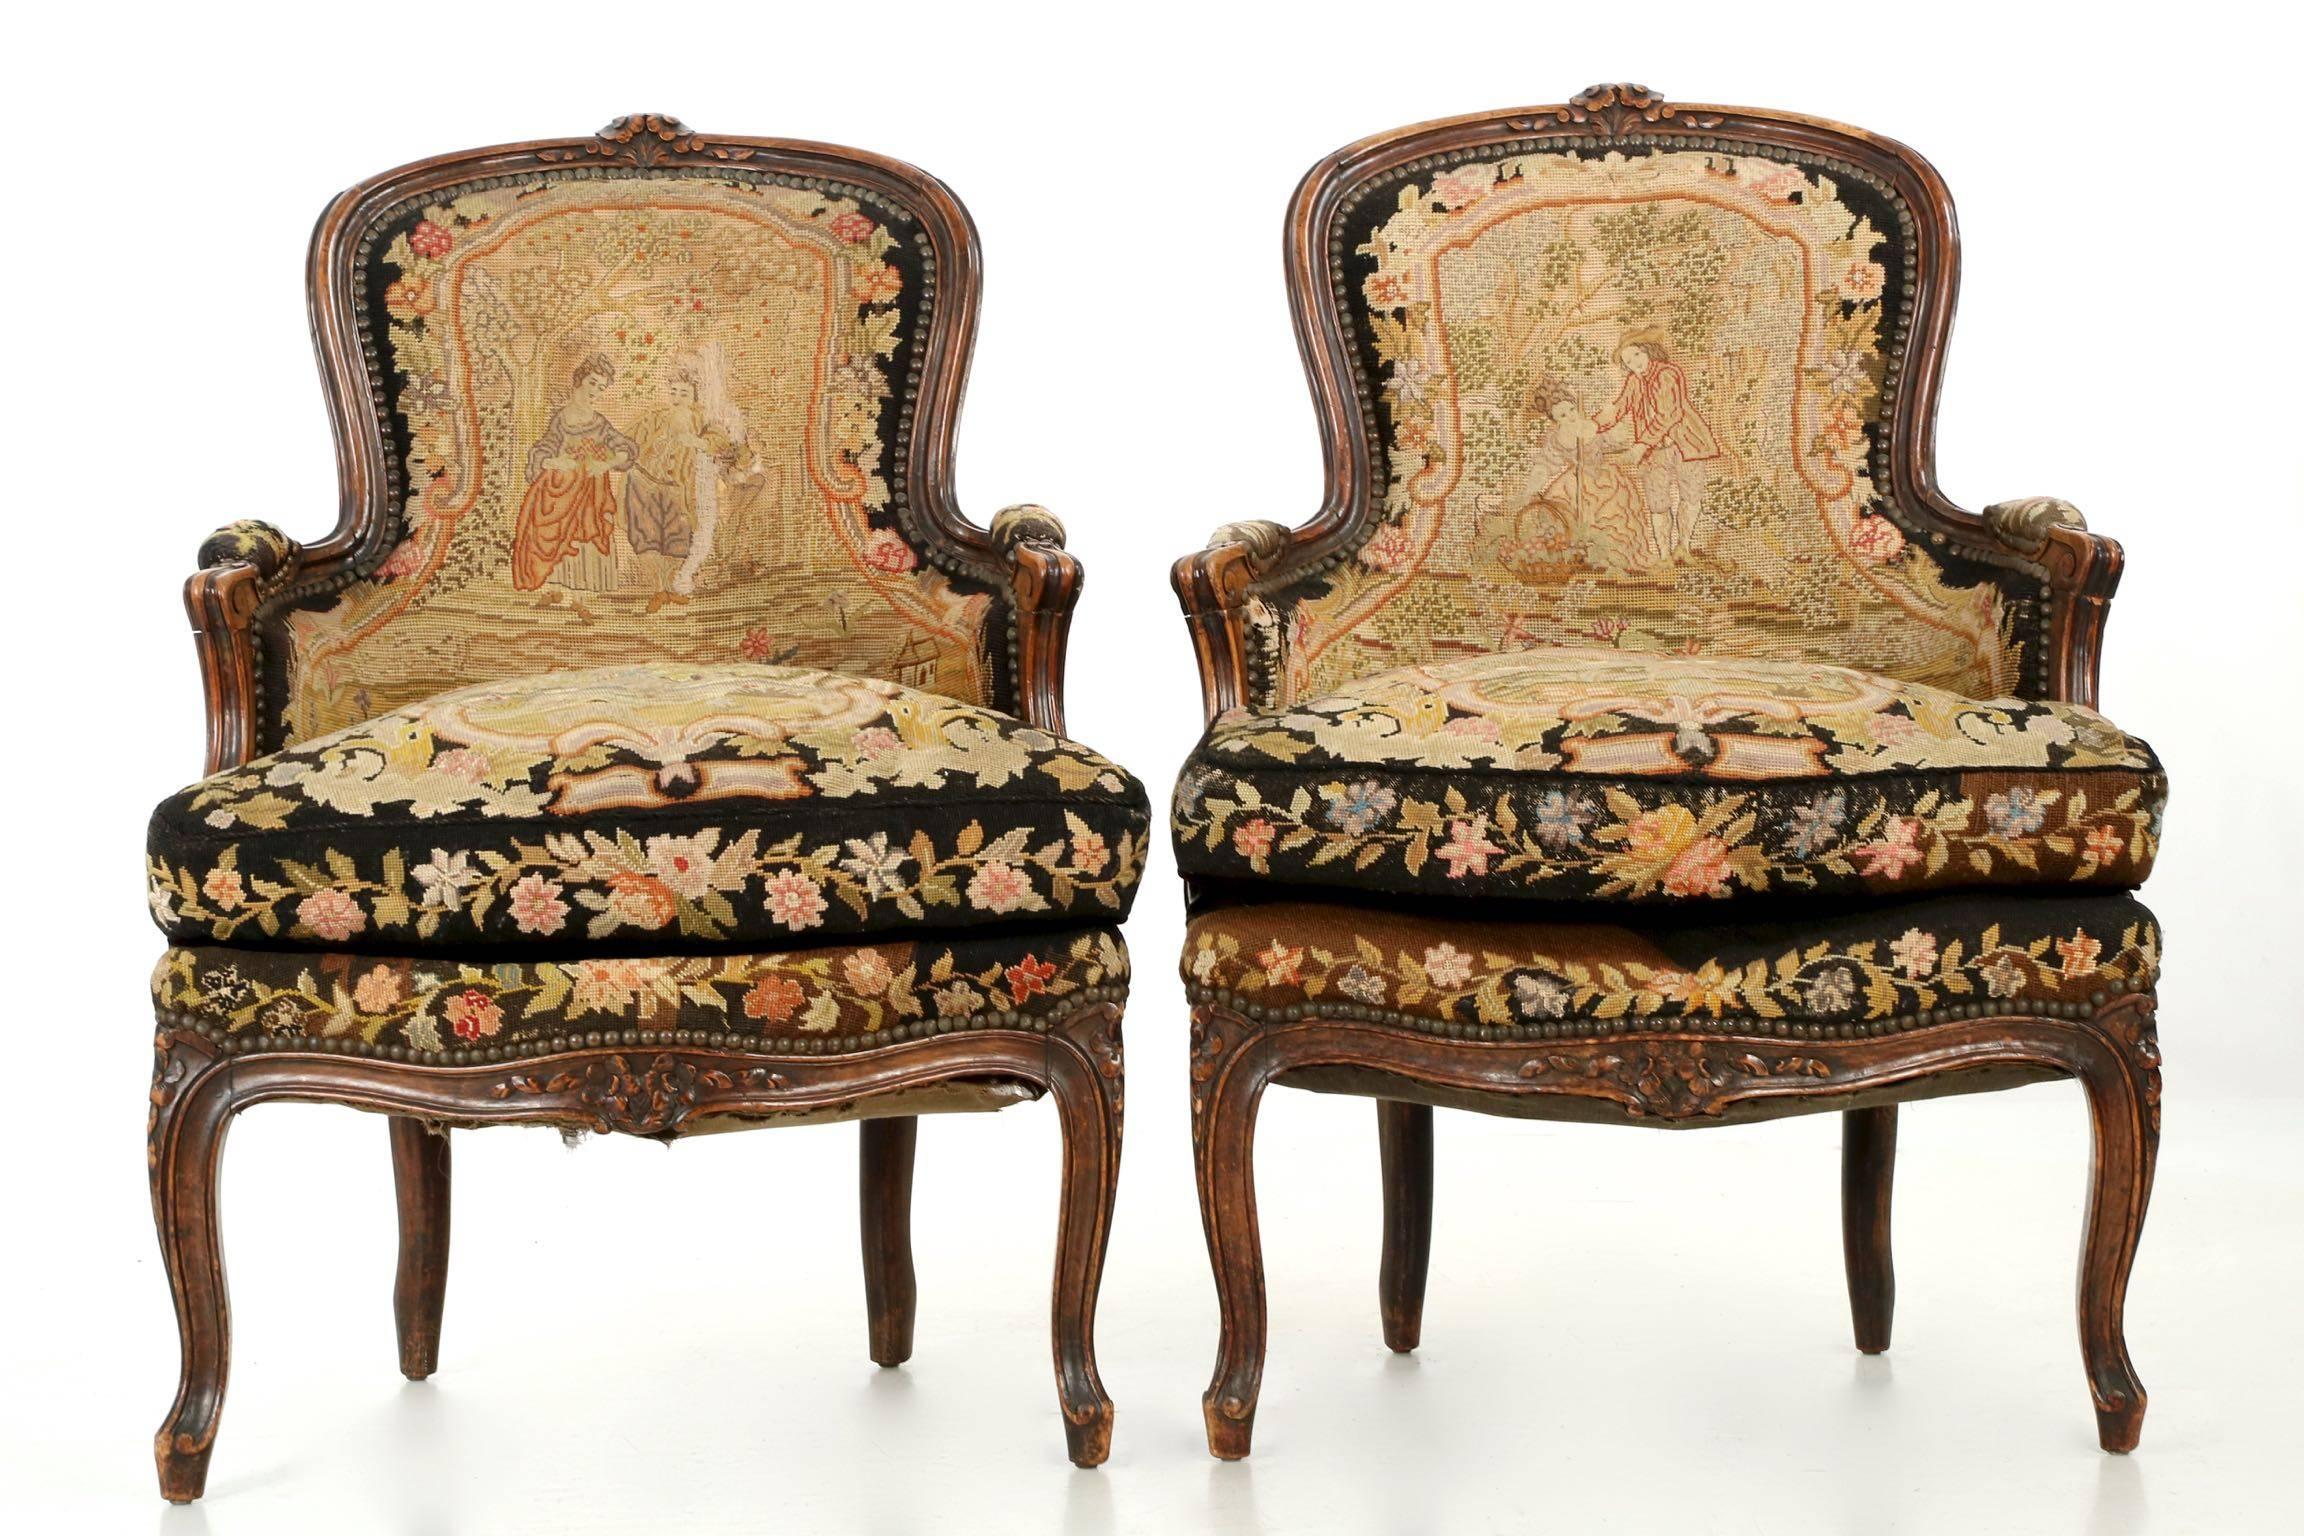 This is such an interesting pair of bergeres with their rich early surfaces and dark oxidization throughout. The arms are rubbed into a rich burnished patina over the reeded hand holds, the recesses remaining a gorgeous charcoal from years of